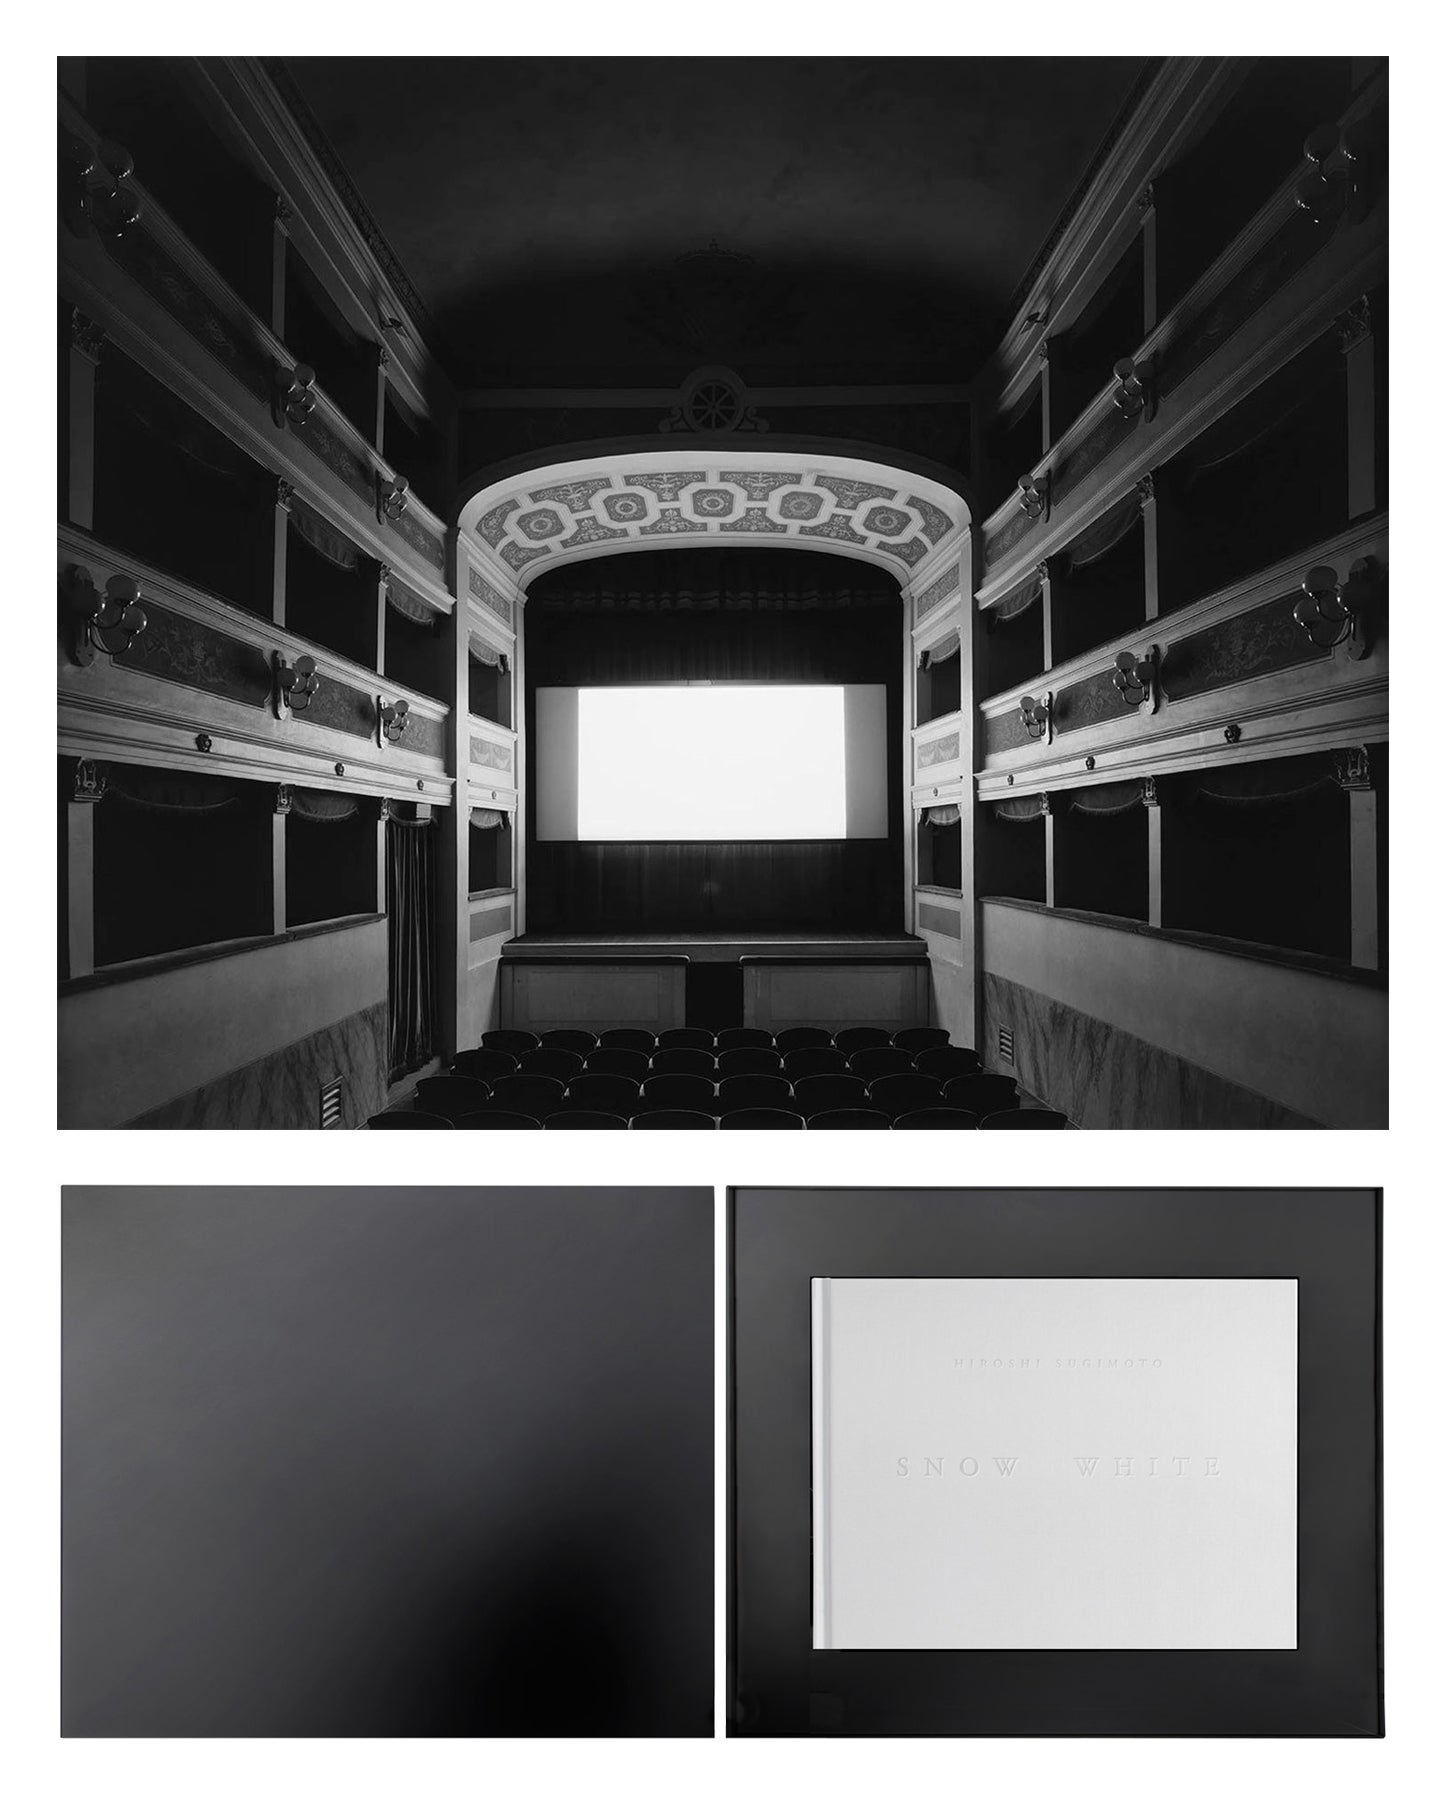 Hiroshi Sugimoto: Snow White, Collector's Limited Edition (with Print)